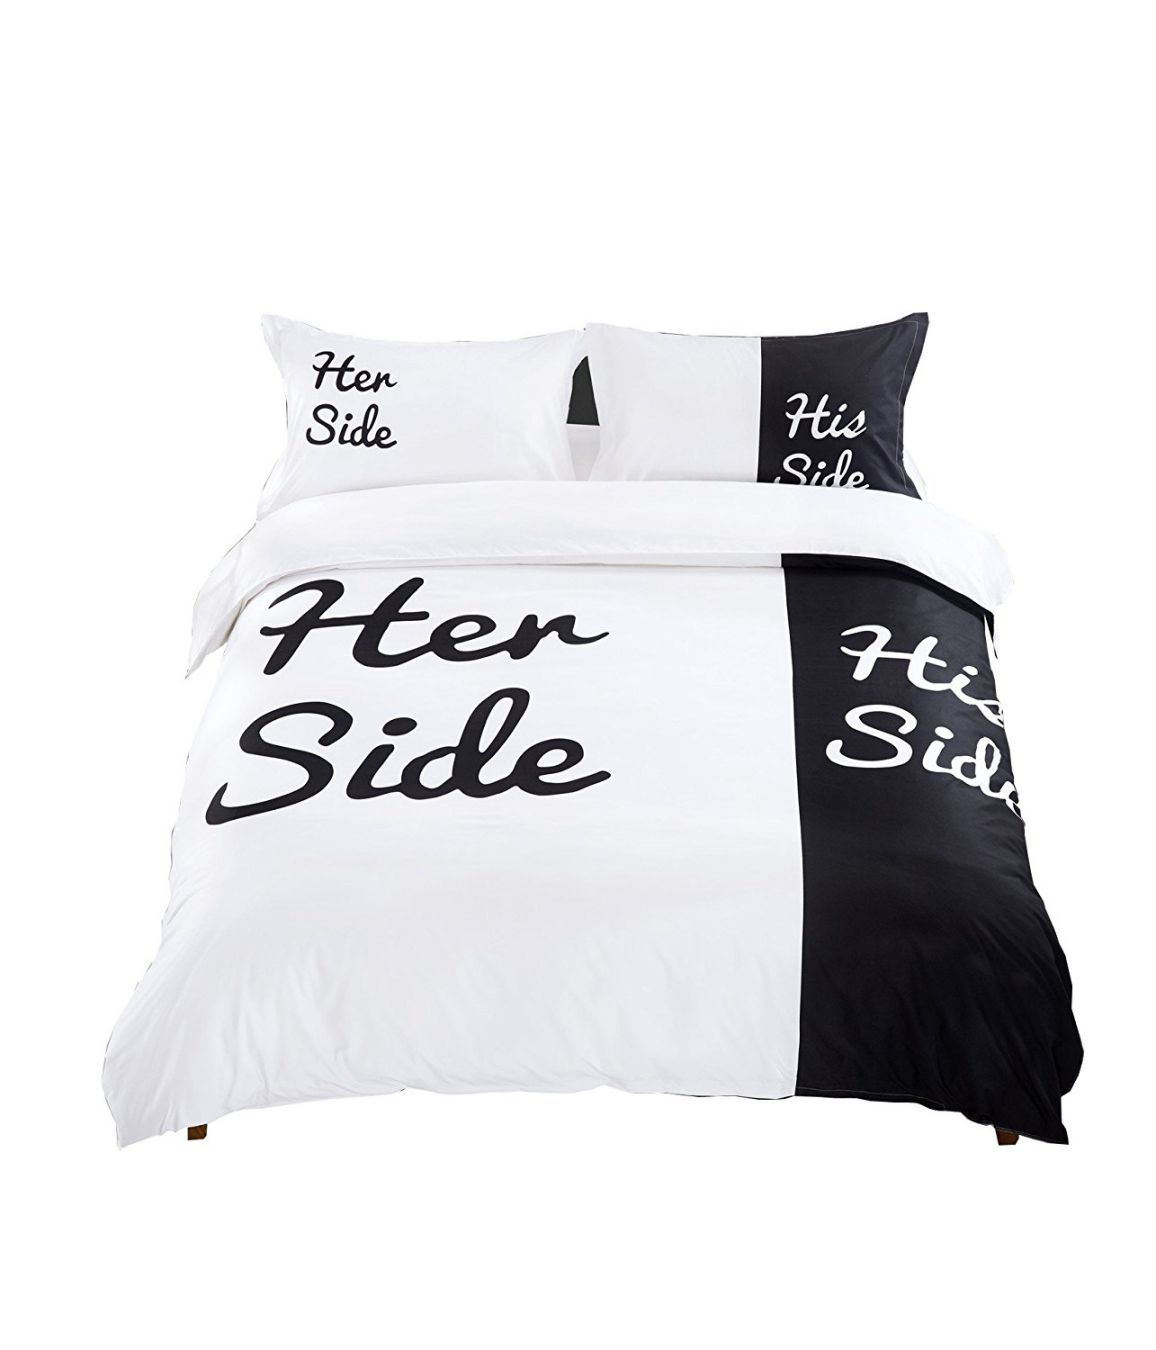 D-Sun His Side and Her Side Cotton 4-Piece Duvet Cover Set